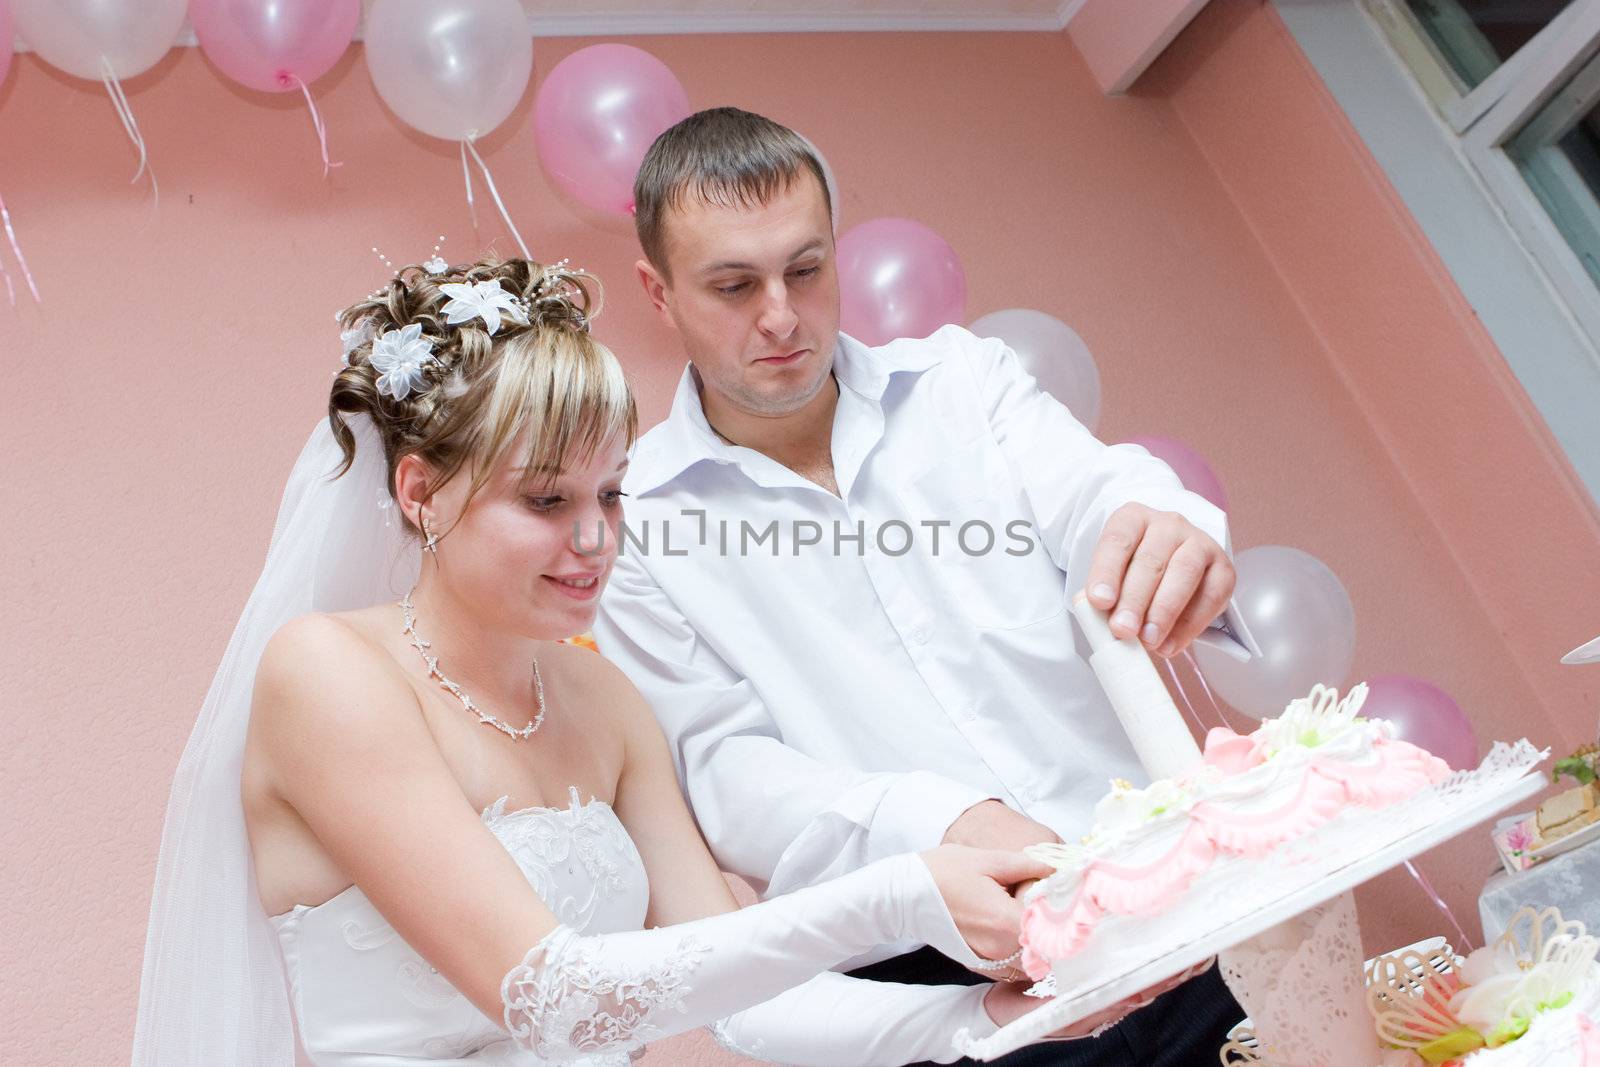 bride and groom with a wedding cake by vsurkov